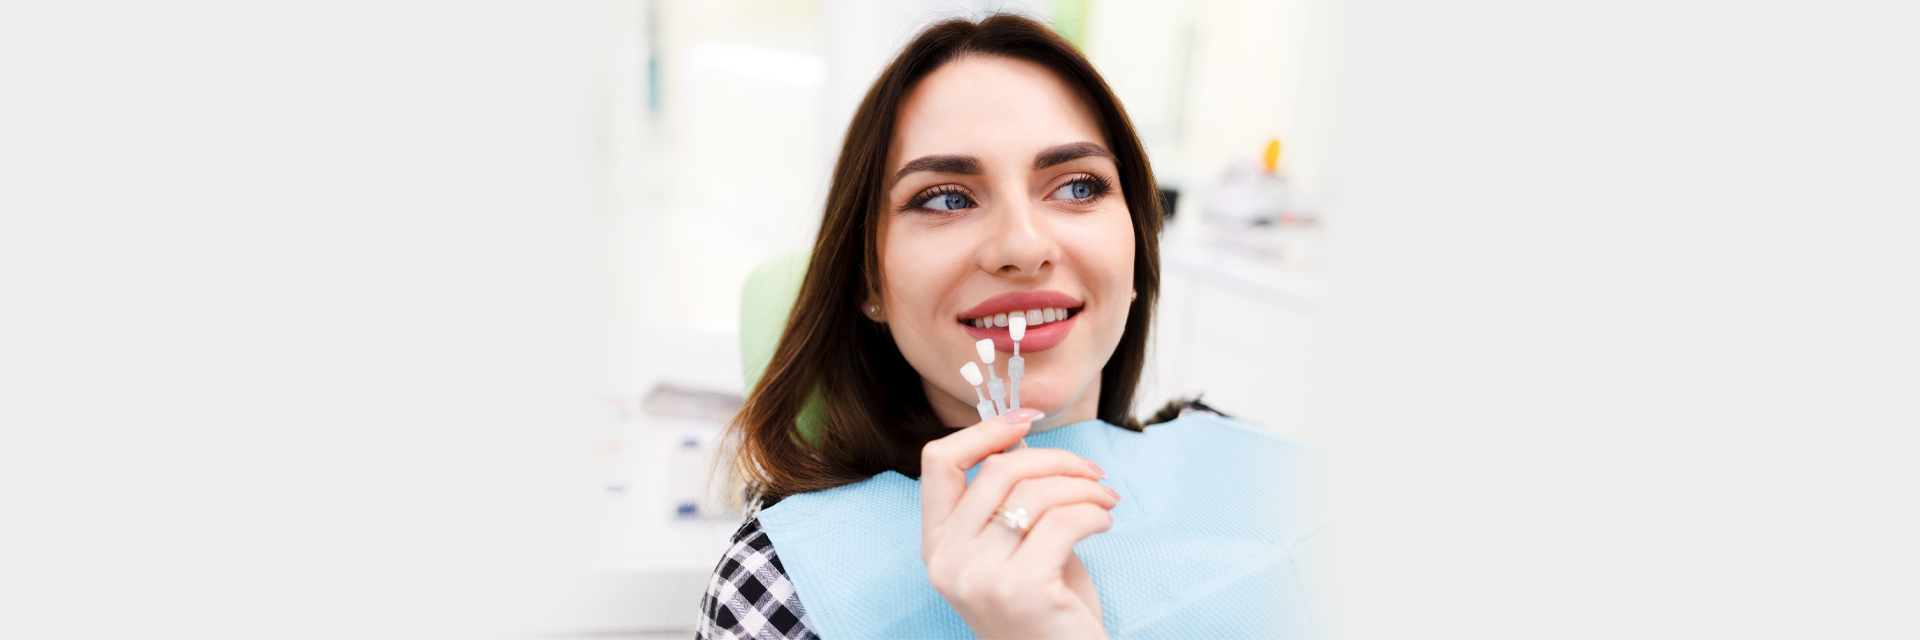 All Information You Ever Wanted about Dental Veneers